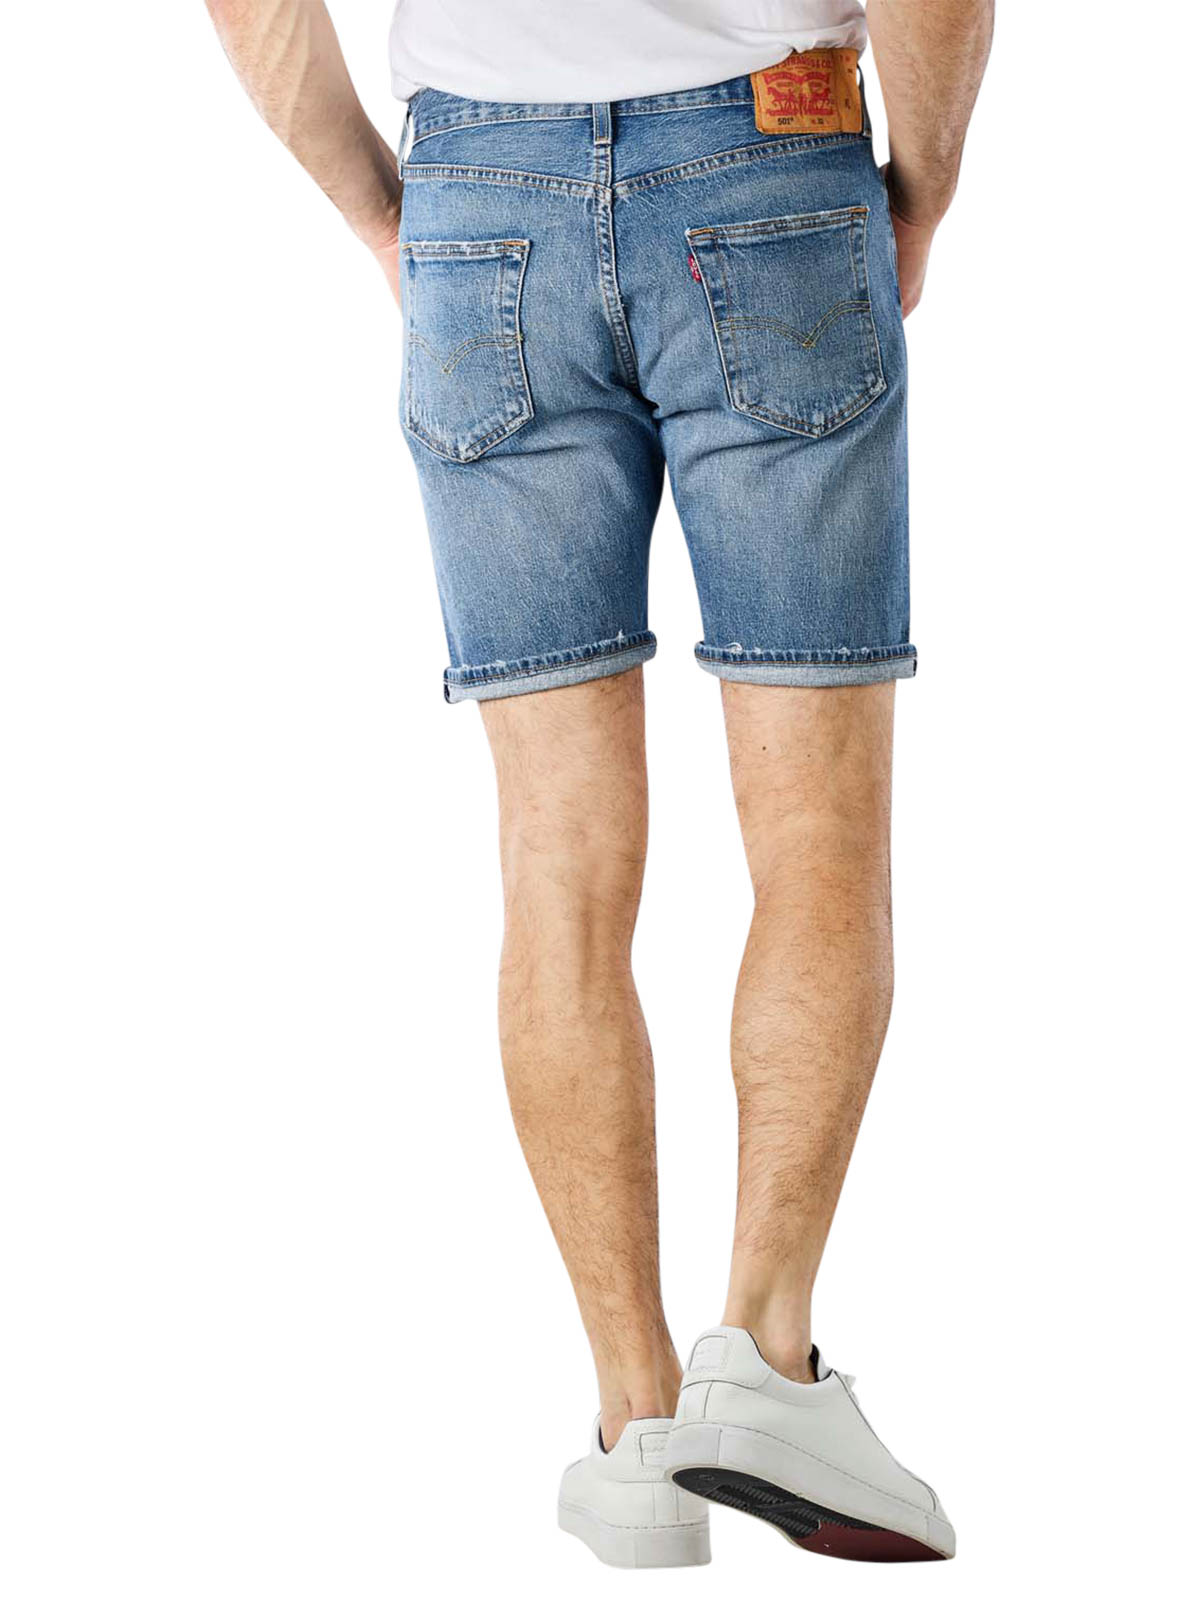 Levi's 501 Jeans Shorts Never Be Mine Short Levi's Men's Shorts | Free  Shipping on  - SIMPLY LOOK GOOD